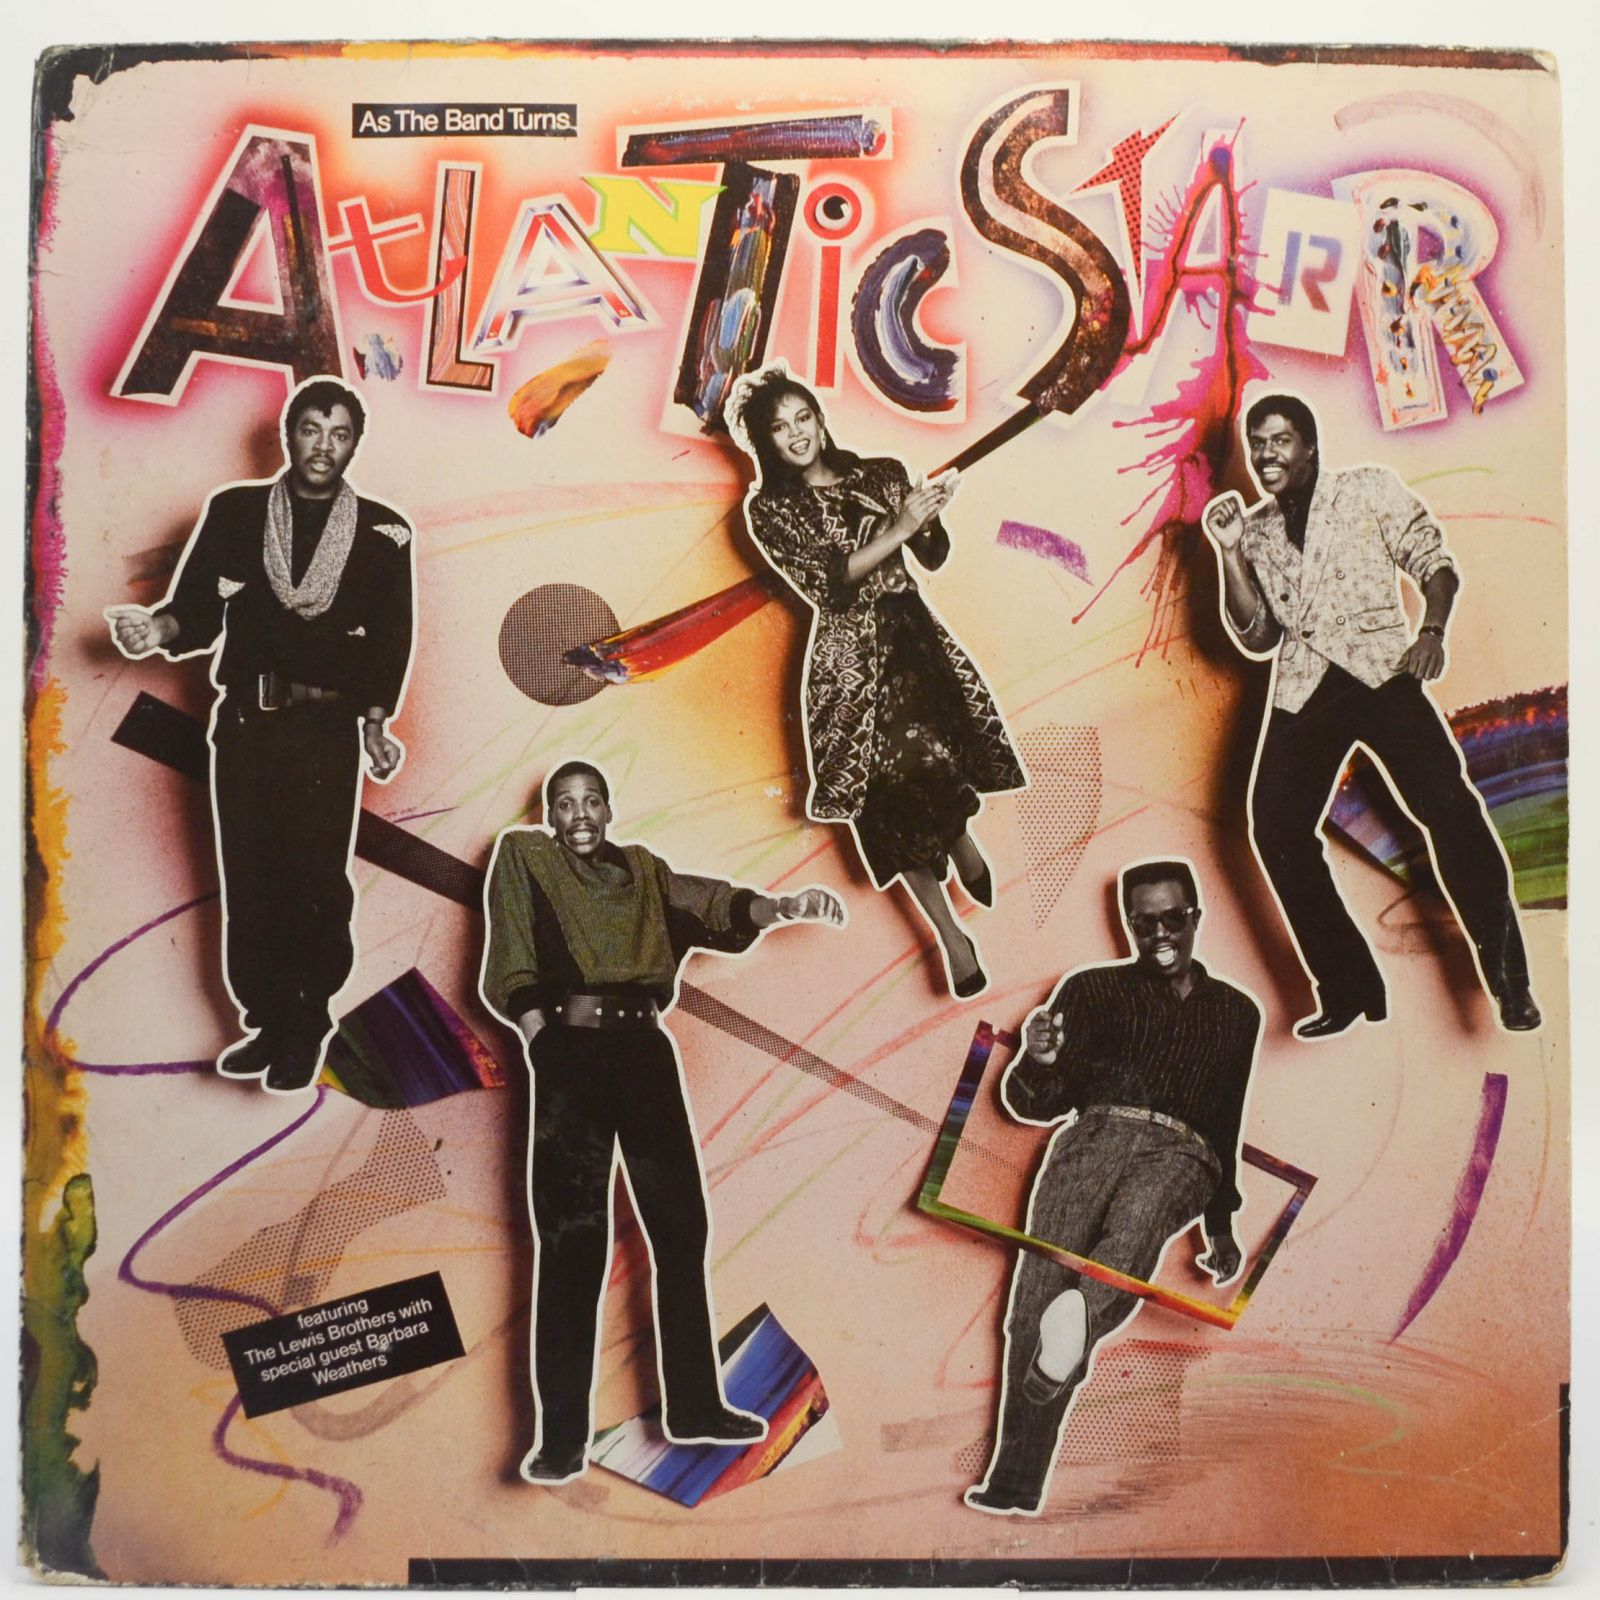 Atlantic Starr — As The Band Turns, 1985